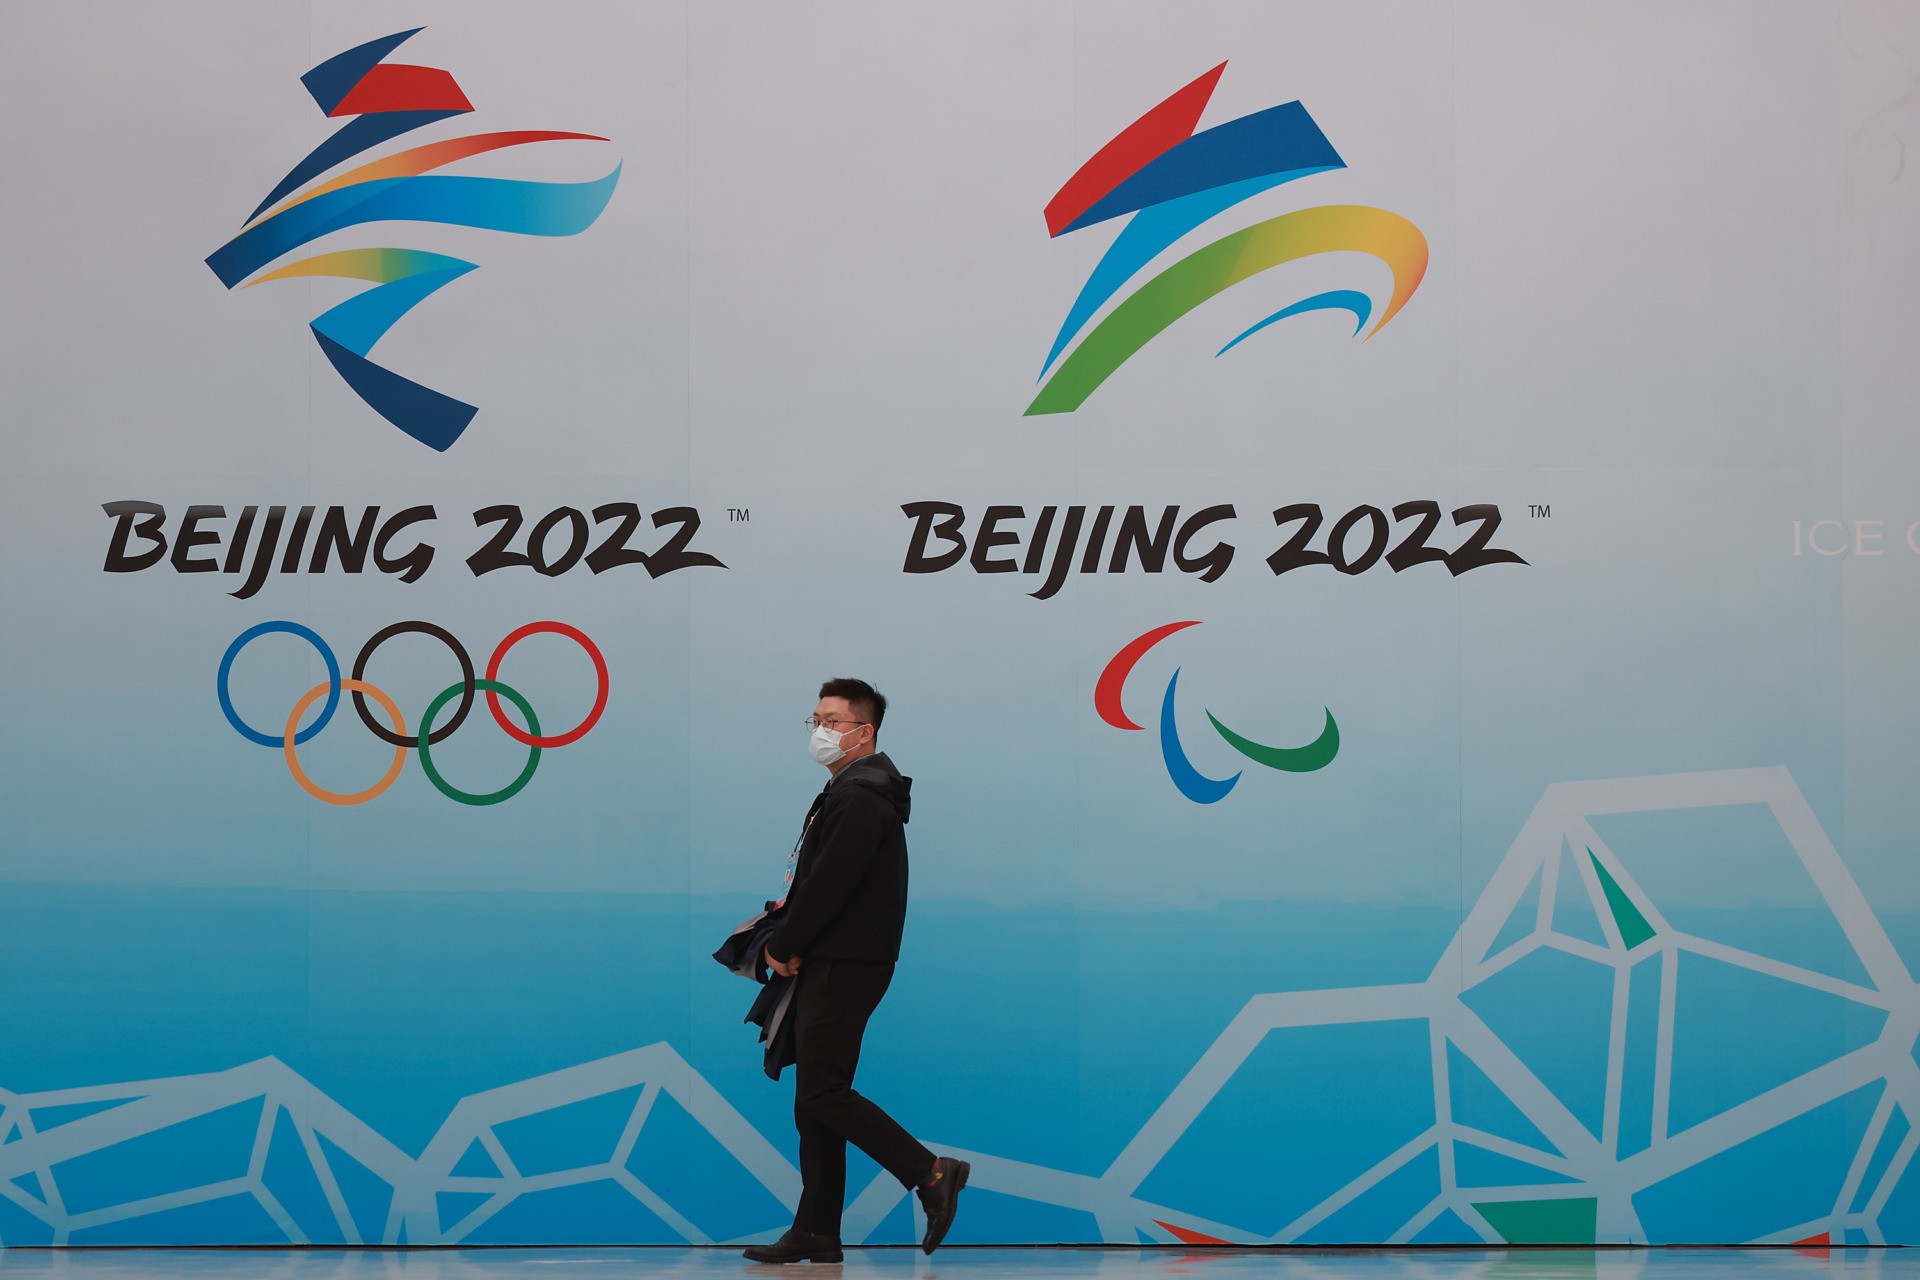 BEIJING, CHINA - APRIL 09: A Chinese man wears a protective mask as he walk in front the logos of the 2022 Beijing Winter Olympics at National Aquatics Centre on April 9, 2021 in Beijing, China. A "Meet in Beijing" ice test event for the 2022 Winter Olympics will be held from April 1-10. (Photo by Lintao Zhang/Getty Images)